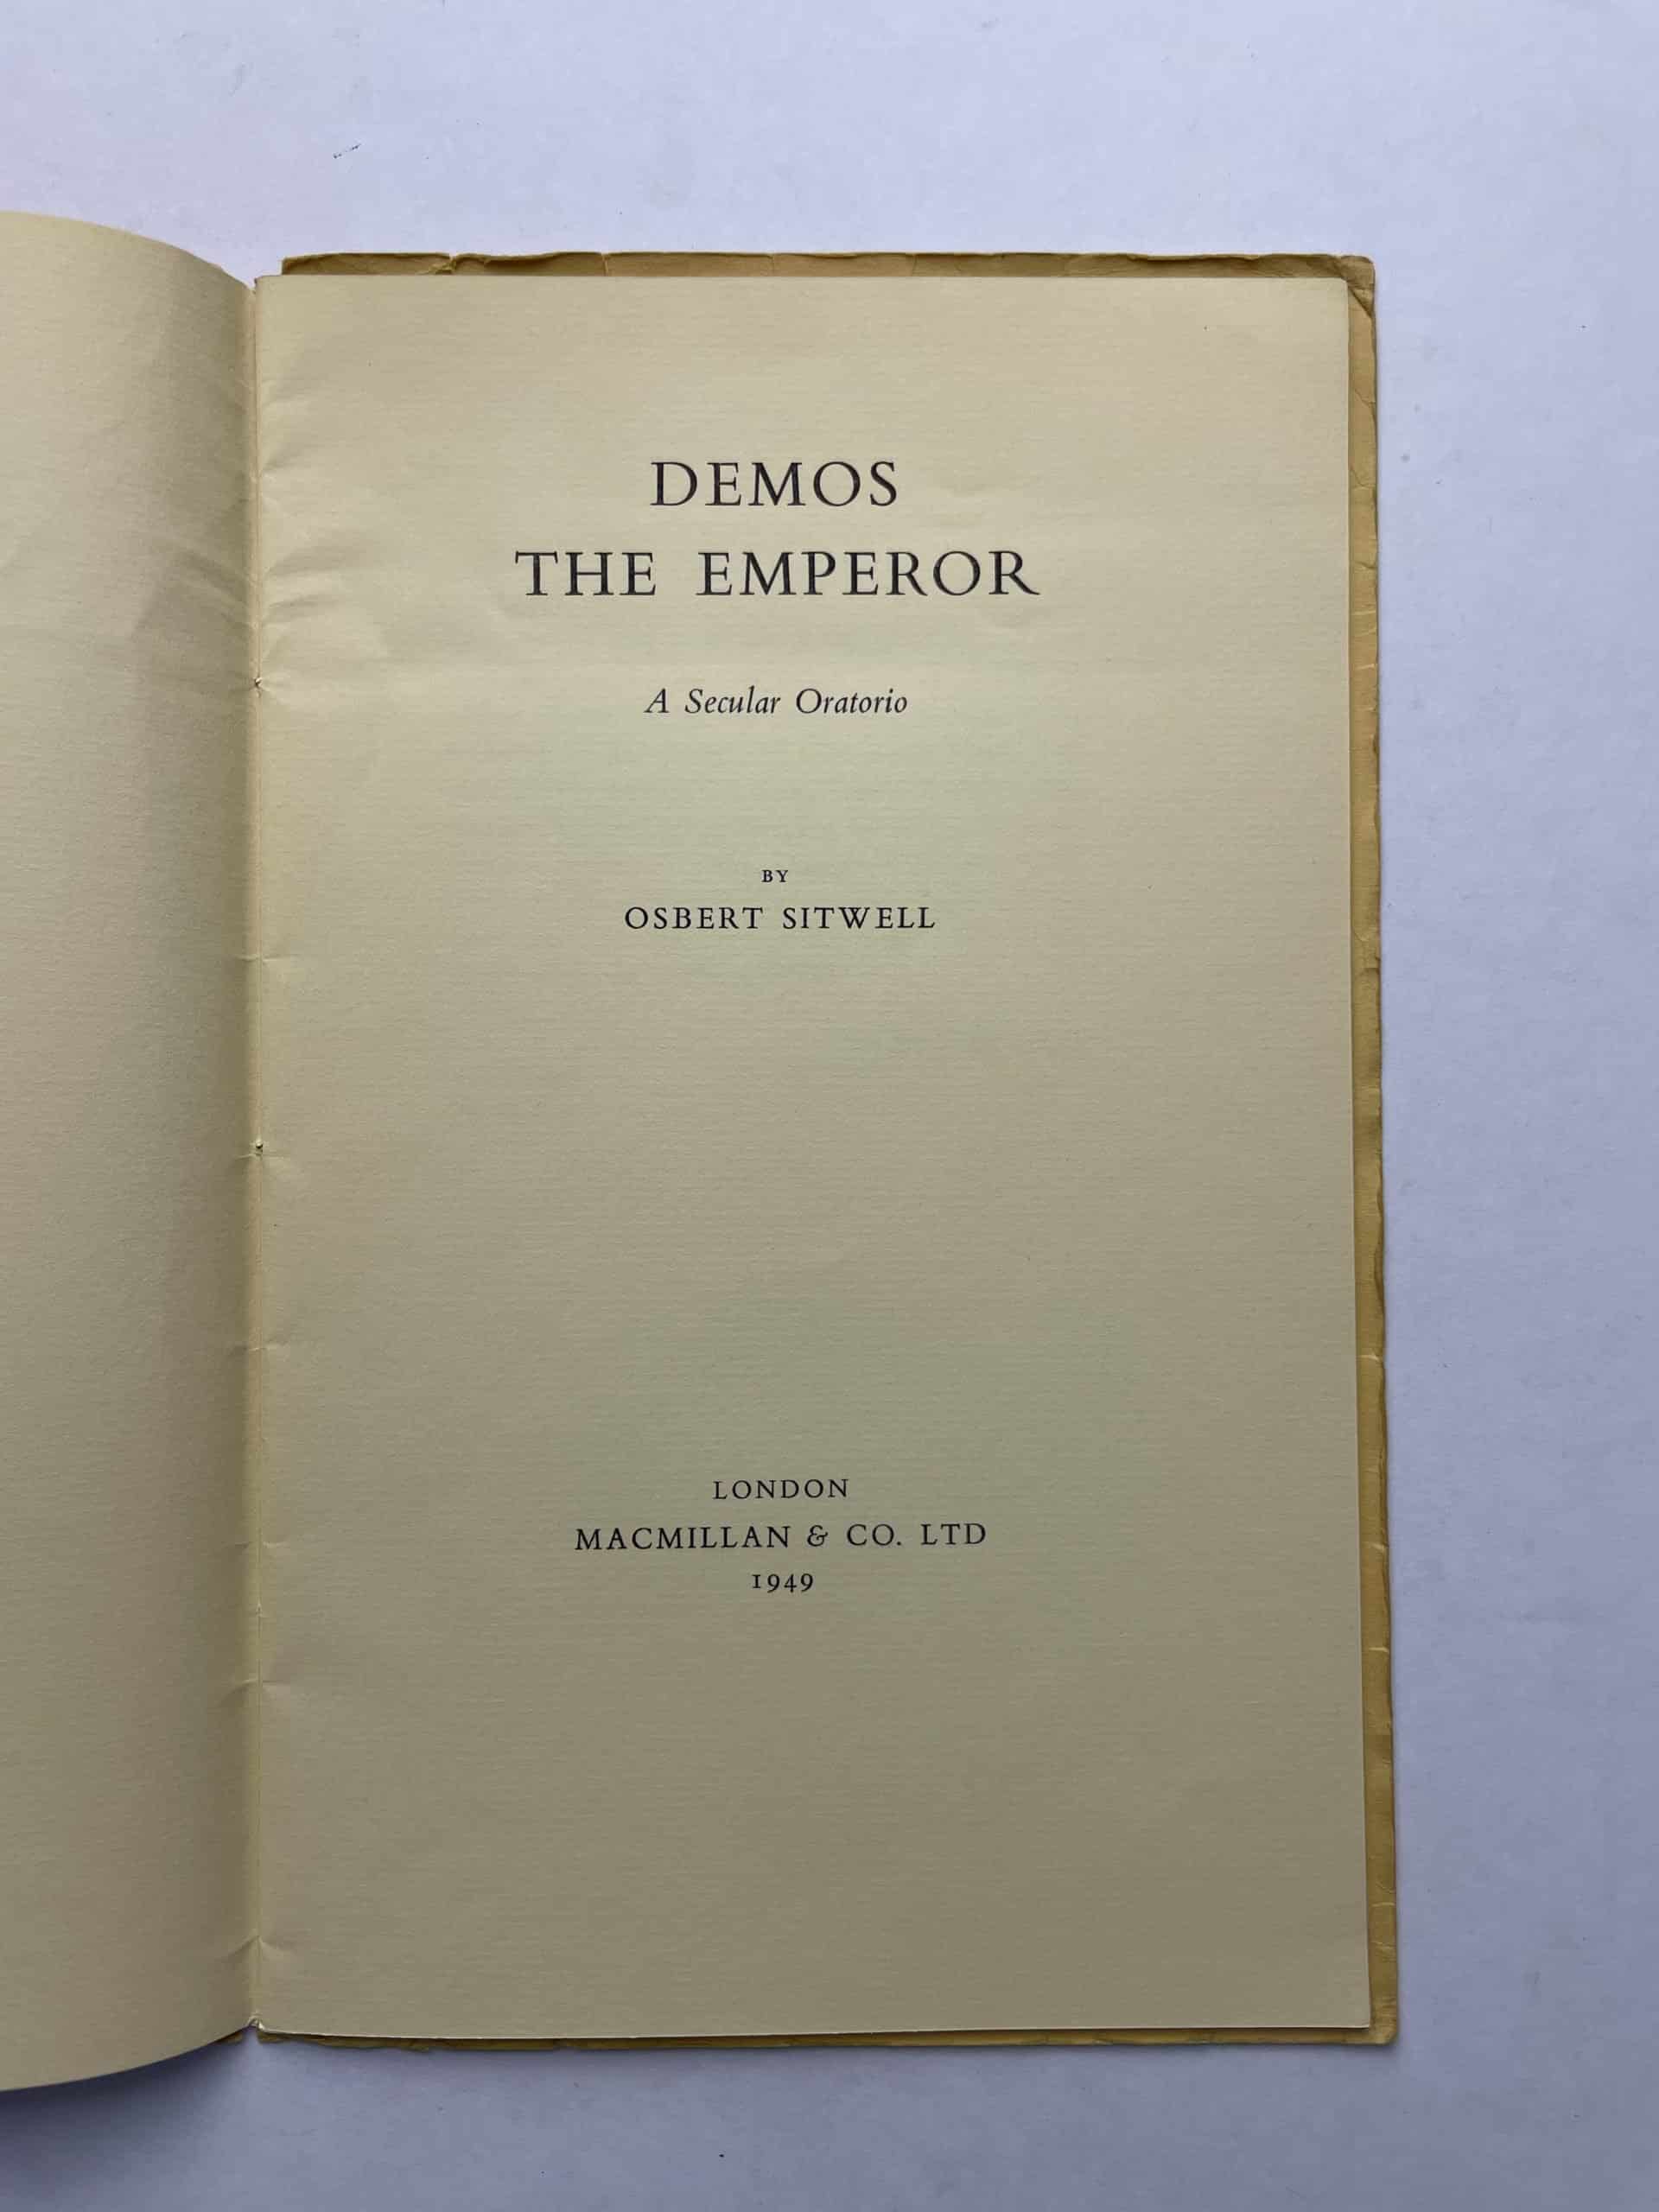 osbert sitwell demos signed first edition3